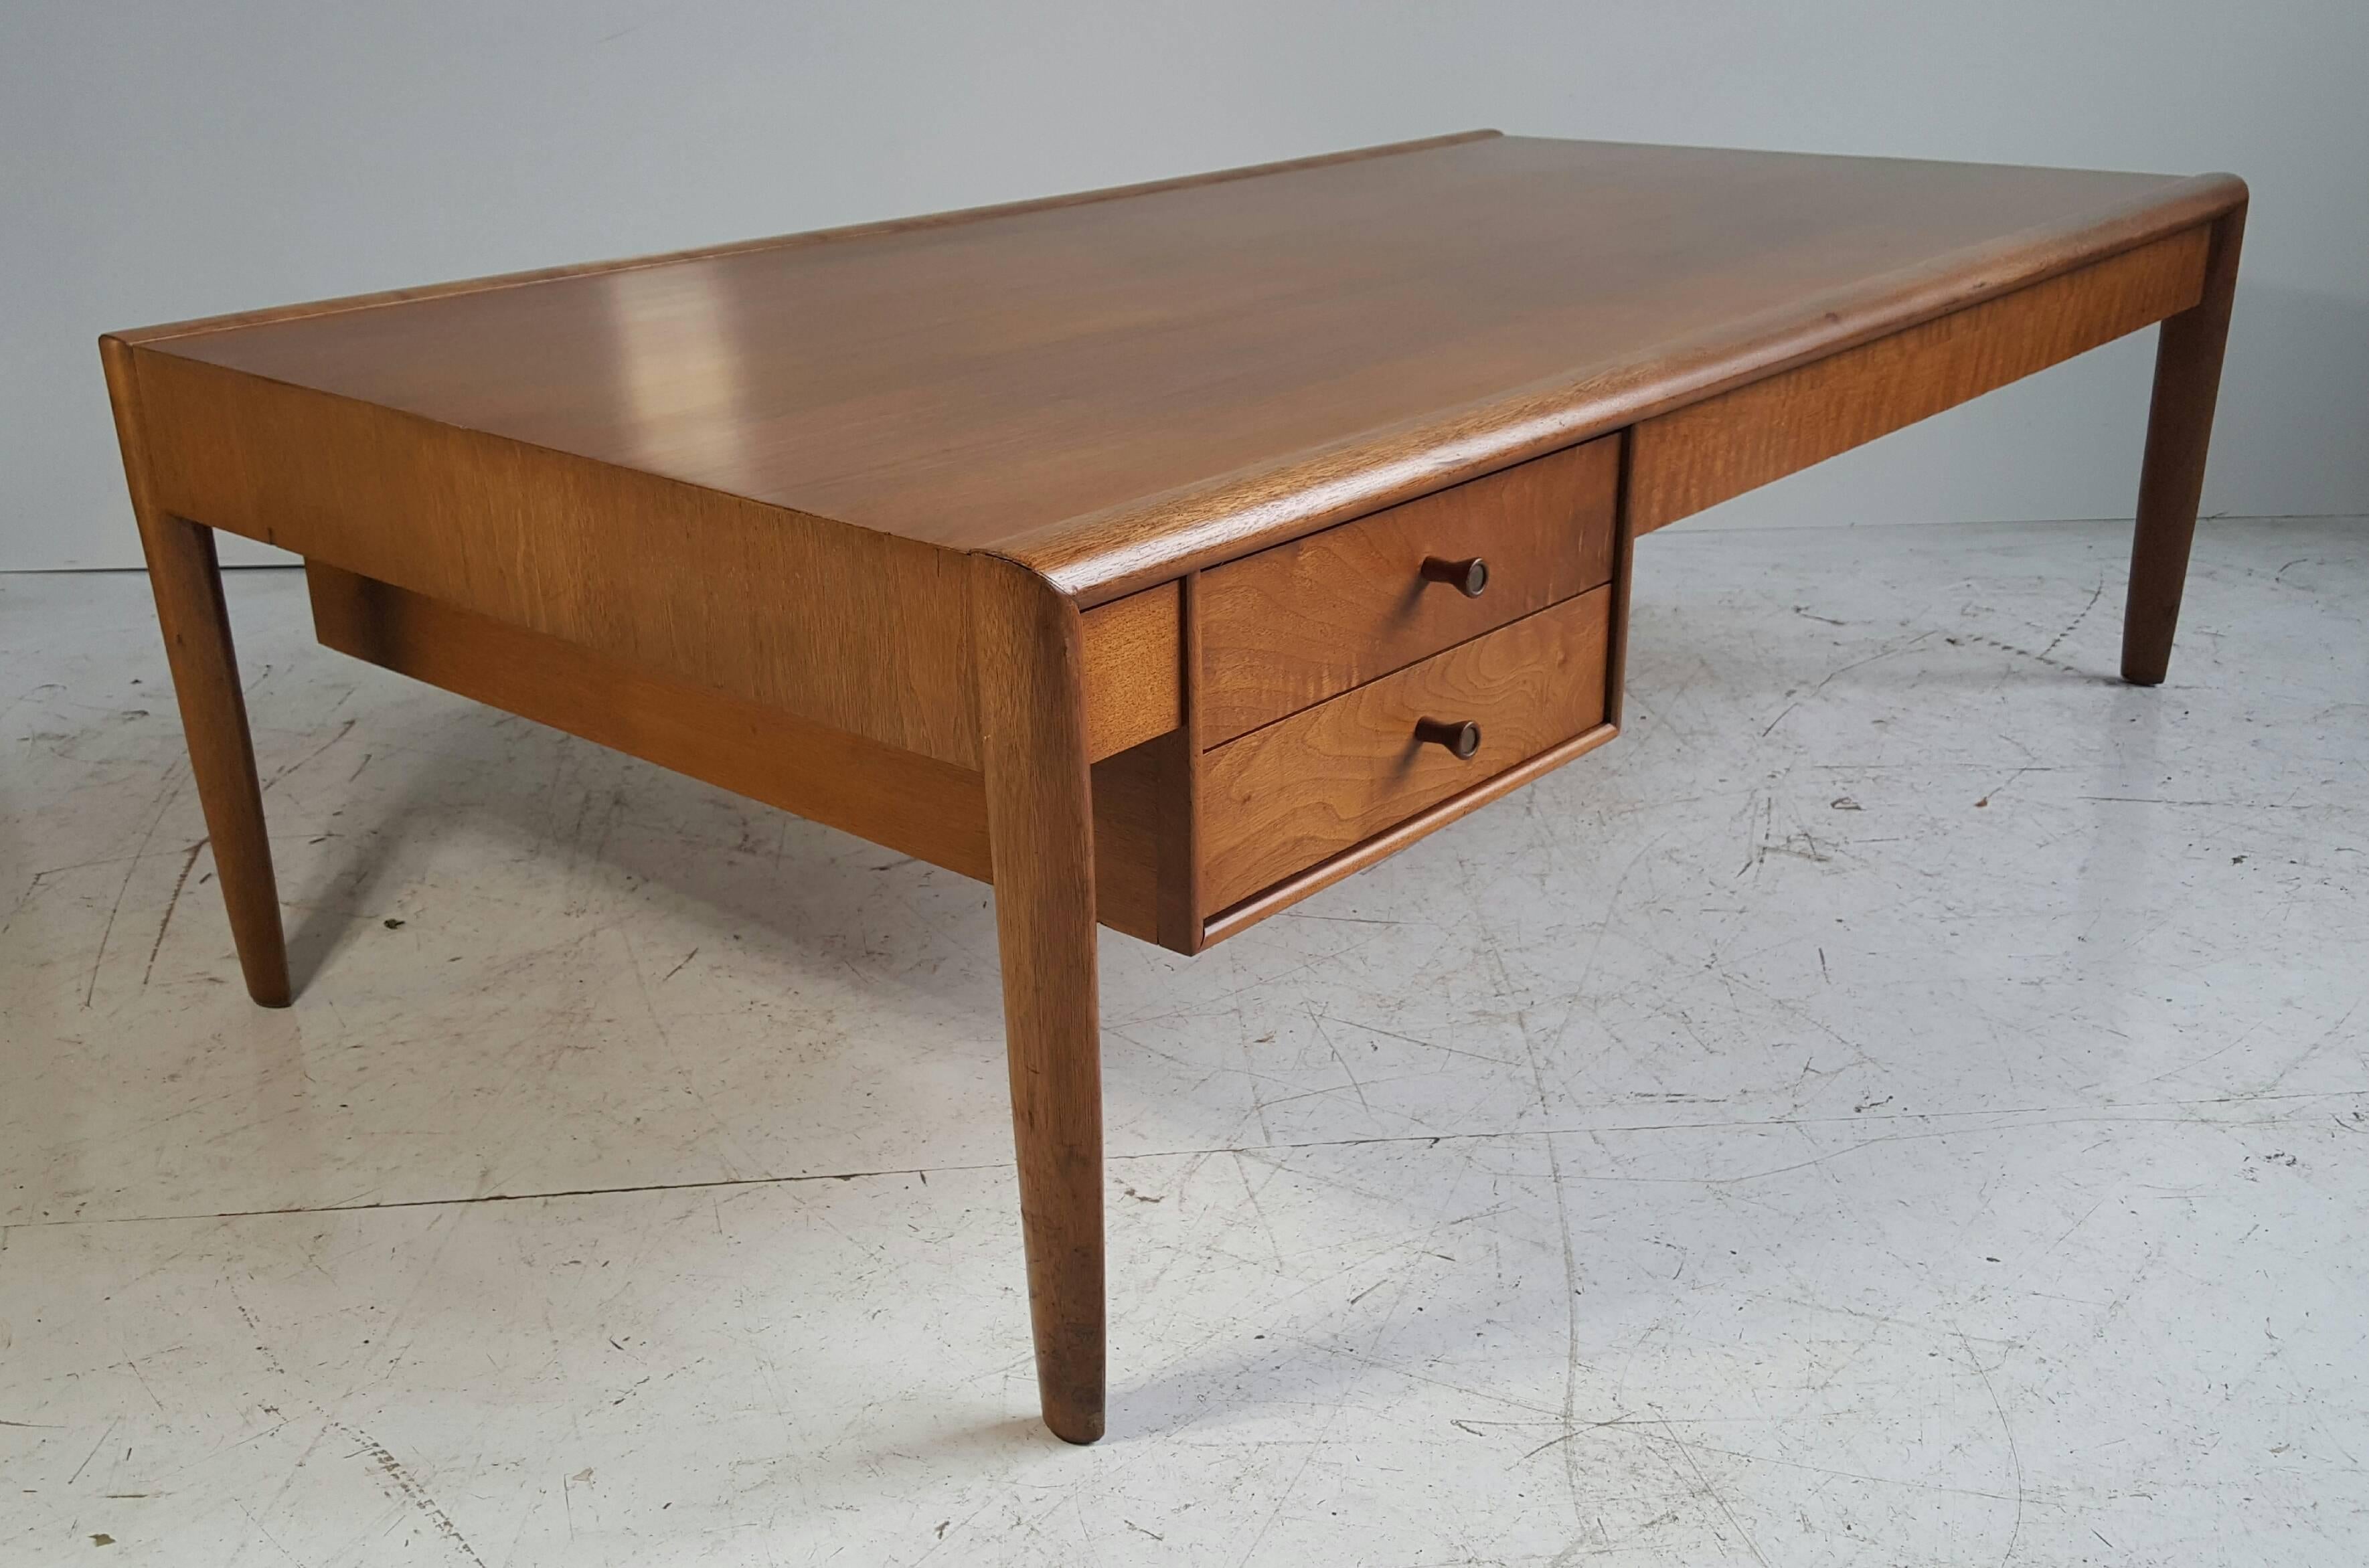 American Mid-Century Modern Cocktail or Coffee Table in the Manner of Robsjohn Gibbings